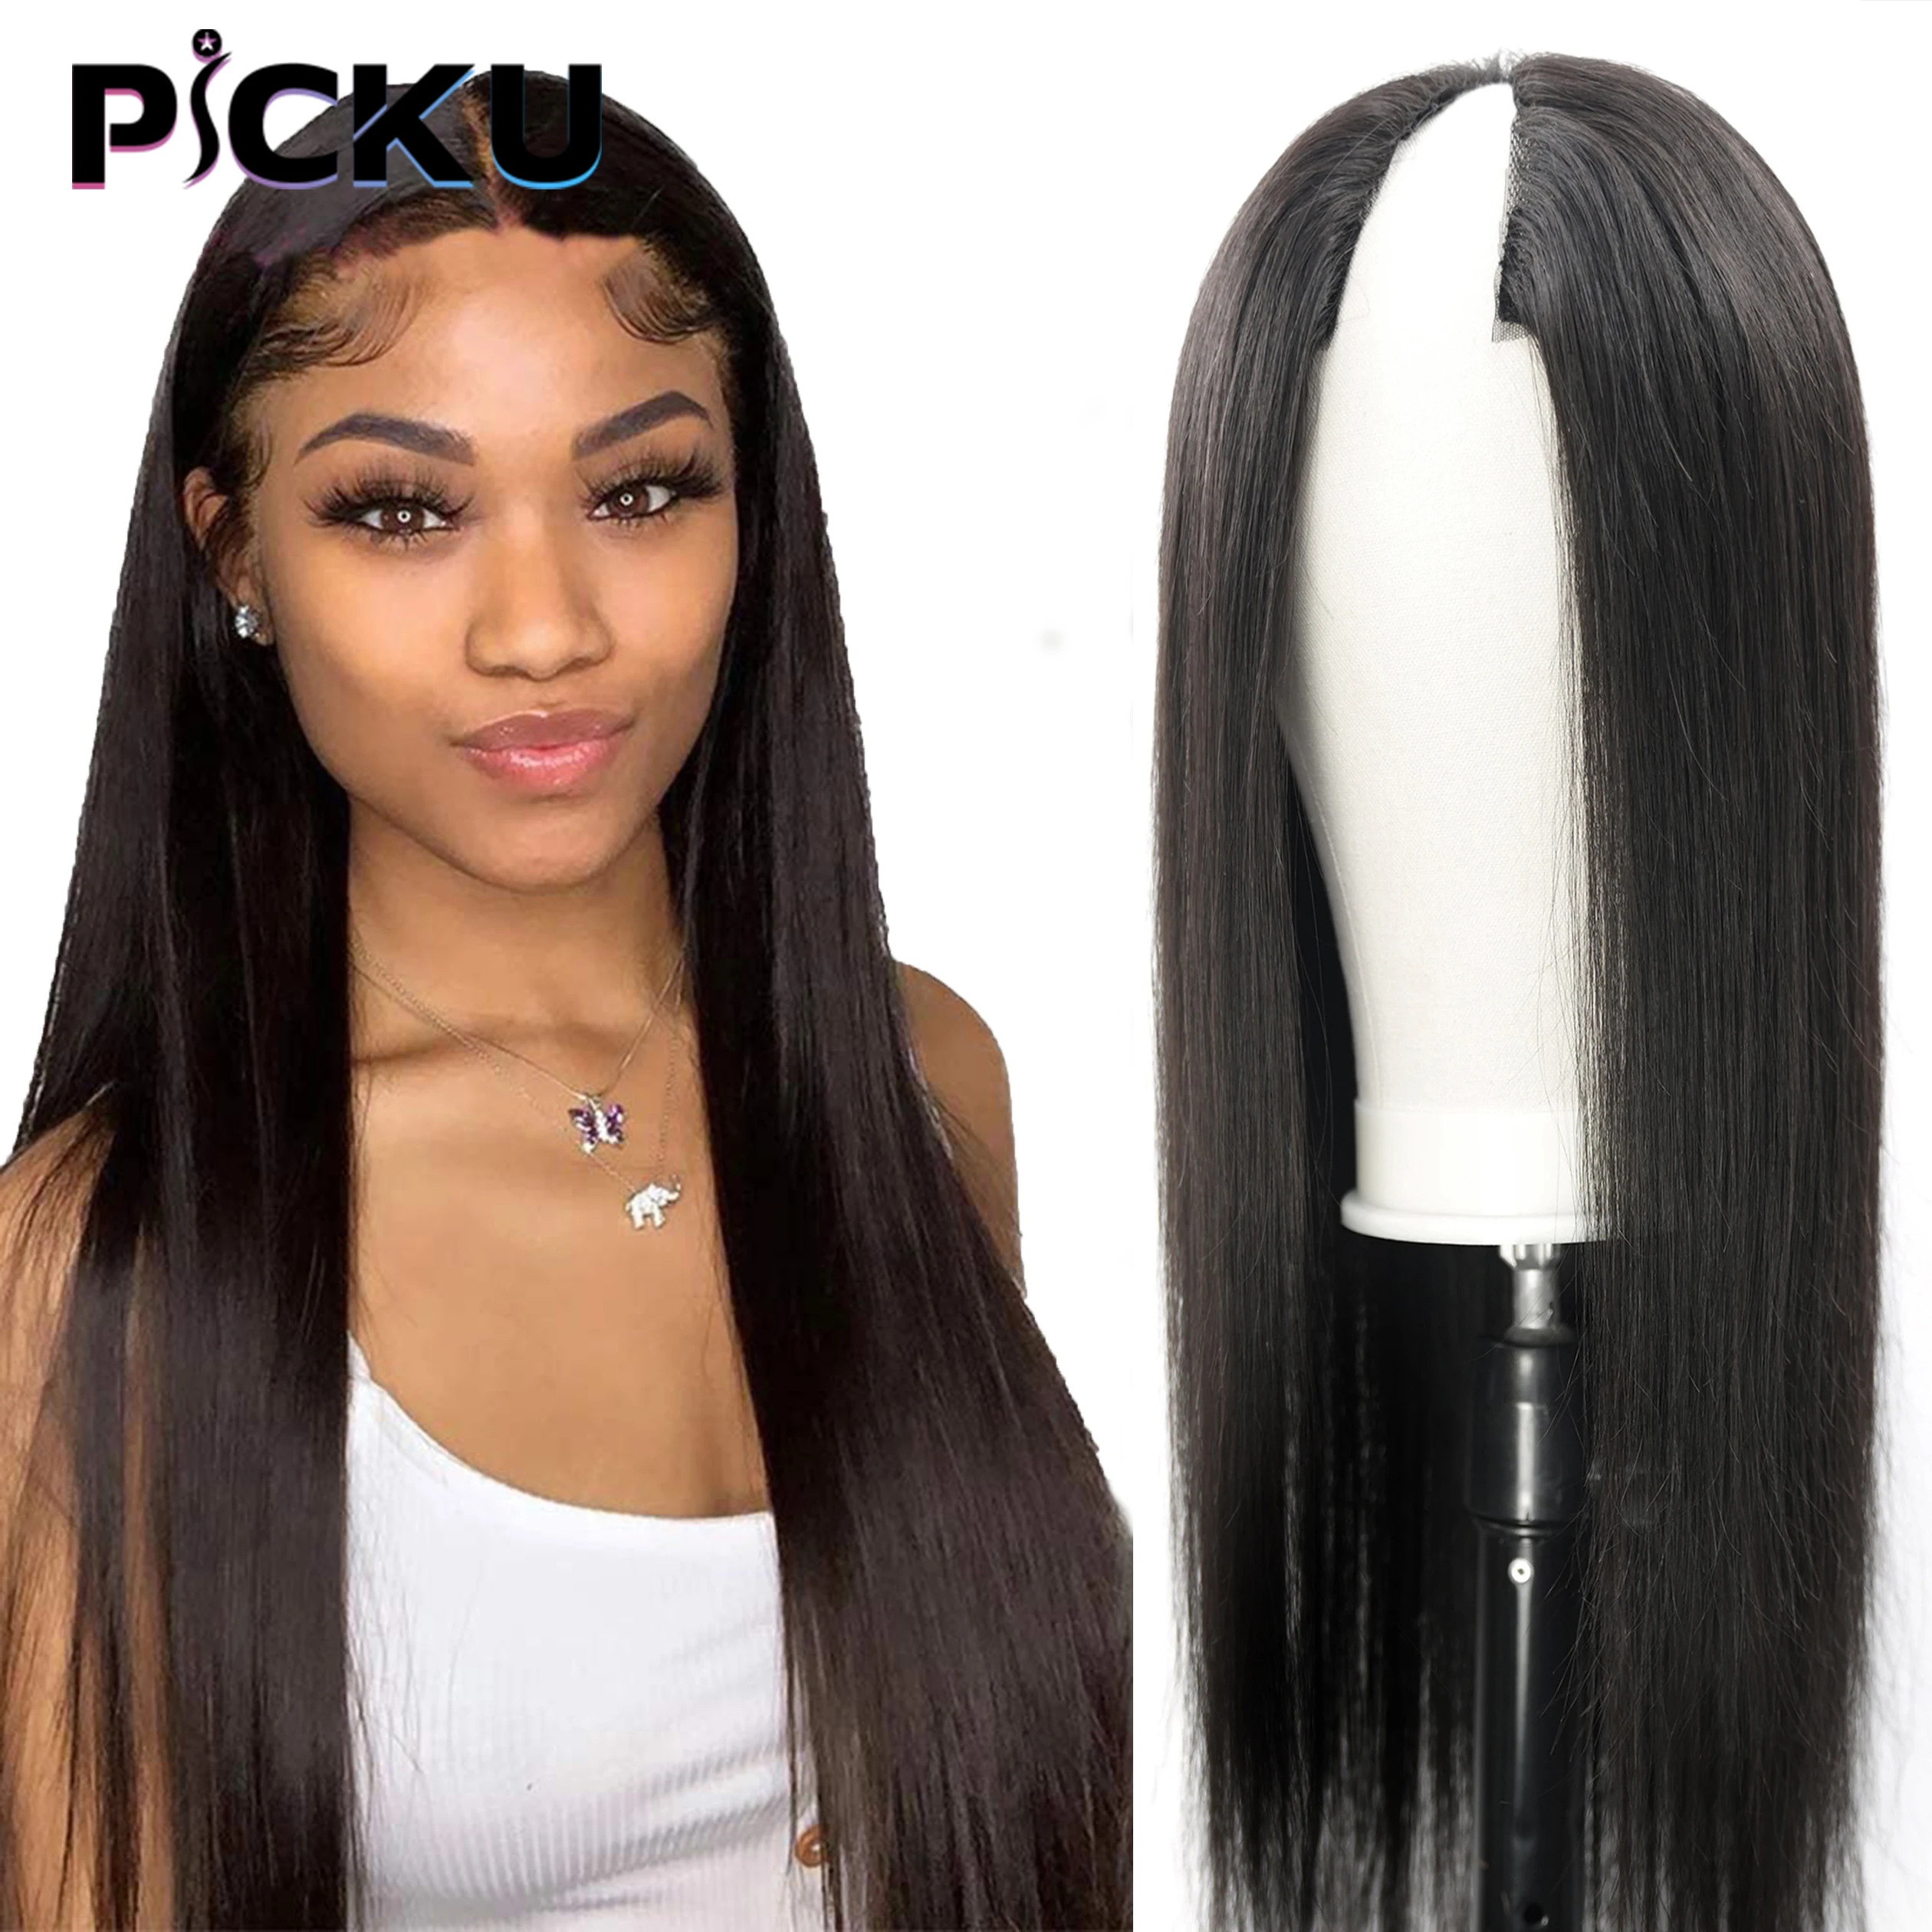 30 34 Inch Straight V Part Wig Human Hair No Leave Out Thin Part Glueless Wig Peruvian Remy Human Hair Wigs for Women U Part Wig enlarge